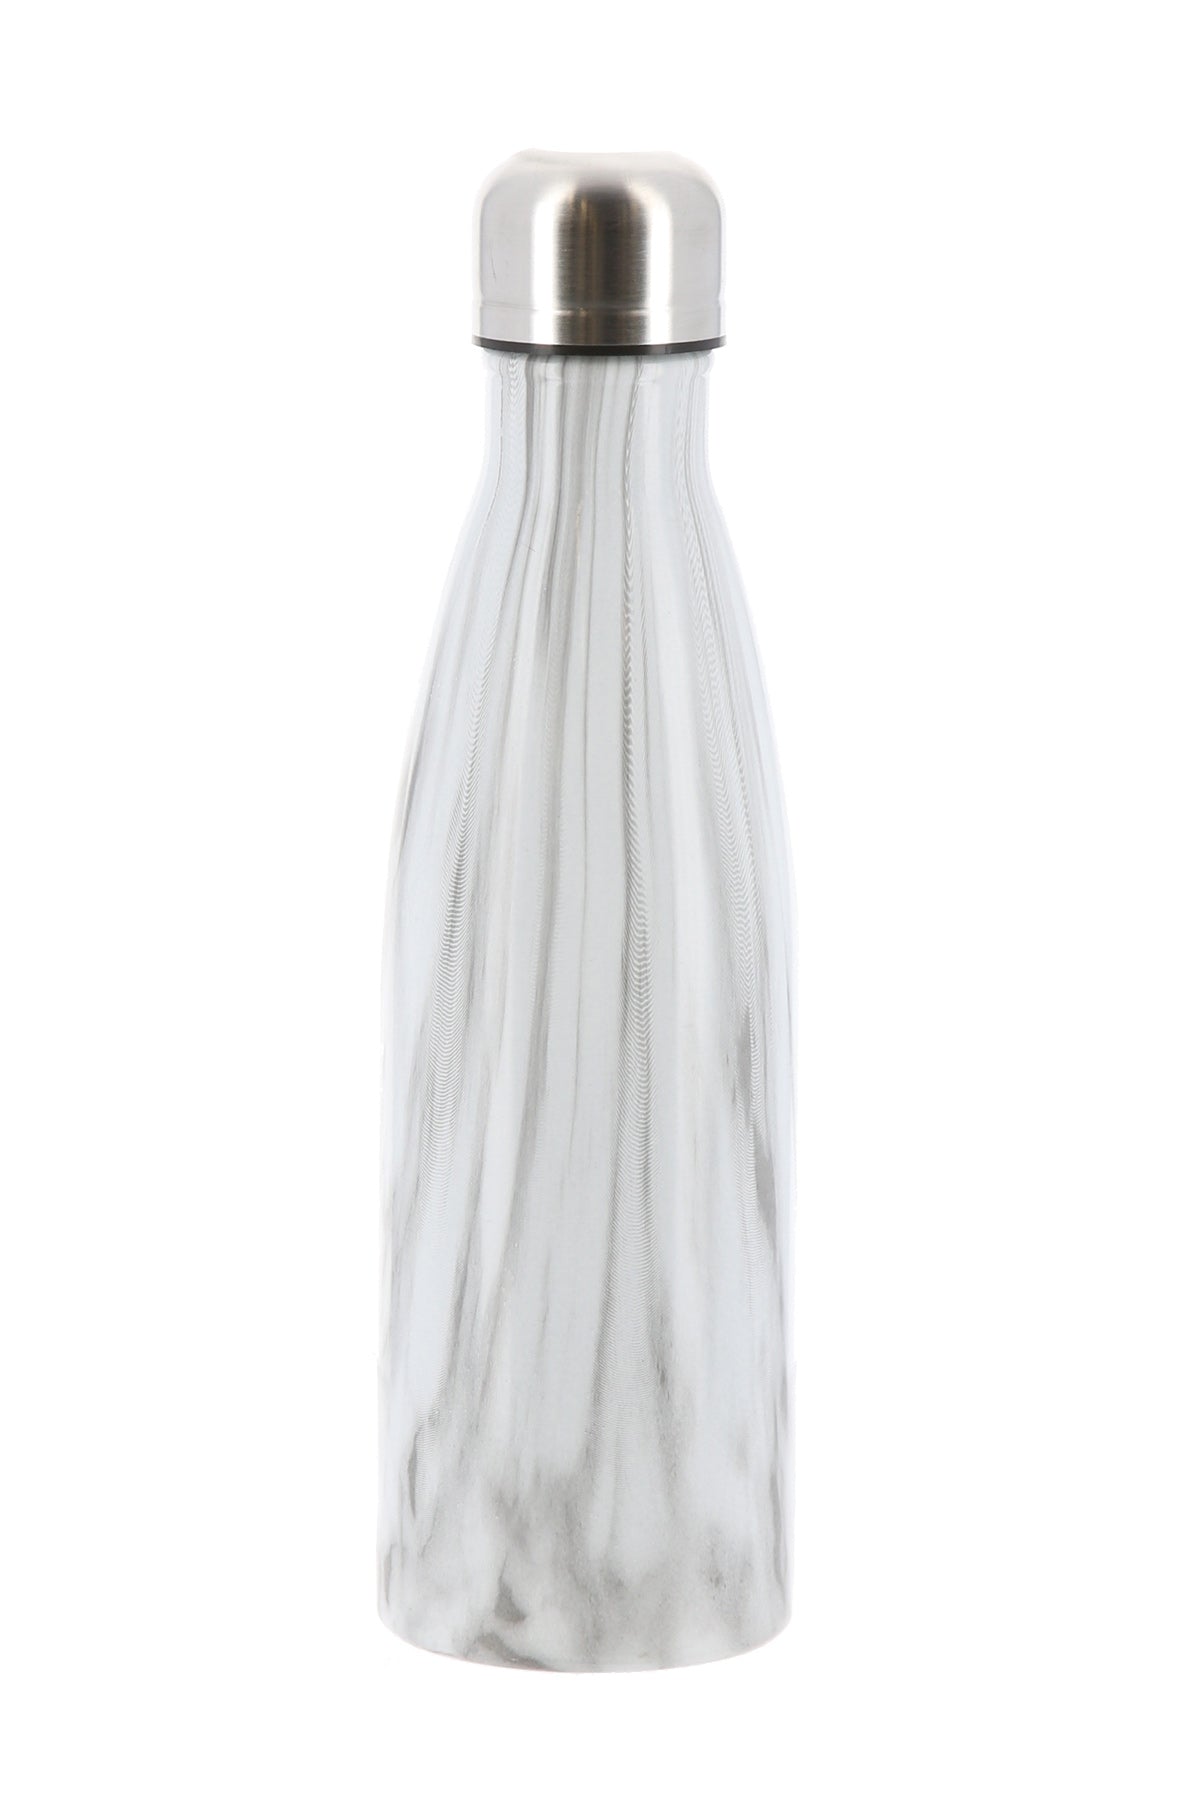 TwelveNYC White Marble Double Wall Stainless Steel Water Bottle